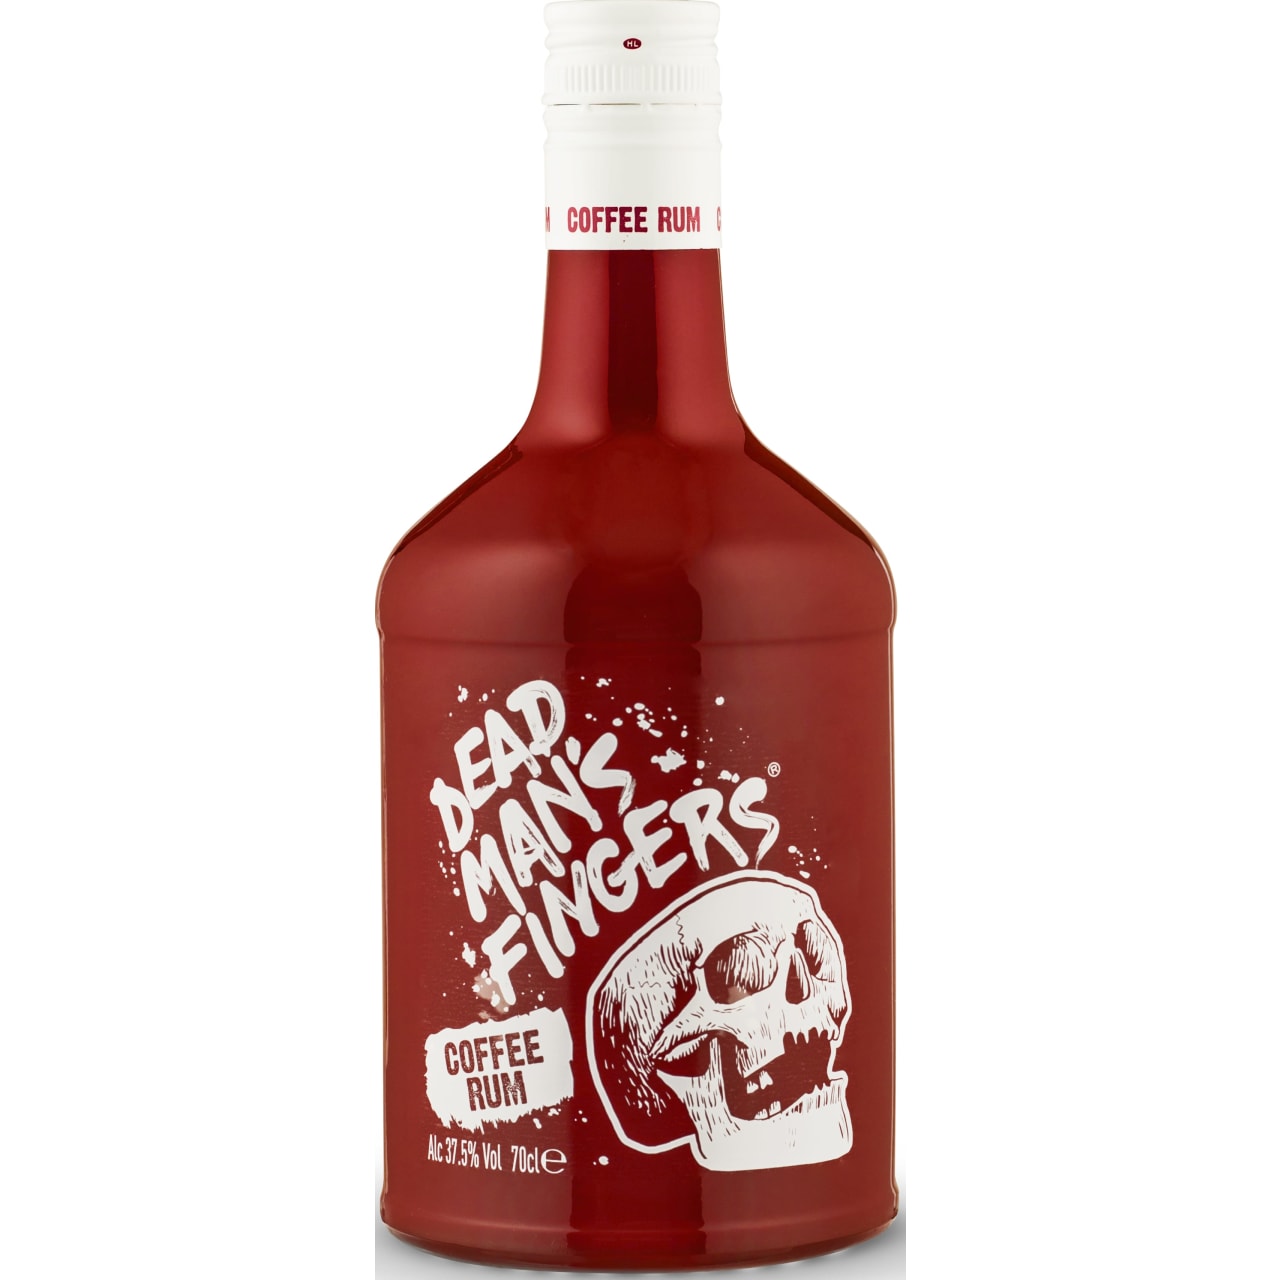 A delicious variation of the Dead Mans Fingers spiced rum infused with heart-warming roasted coffee.